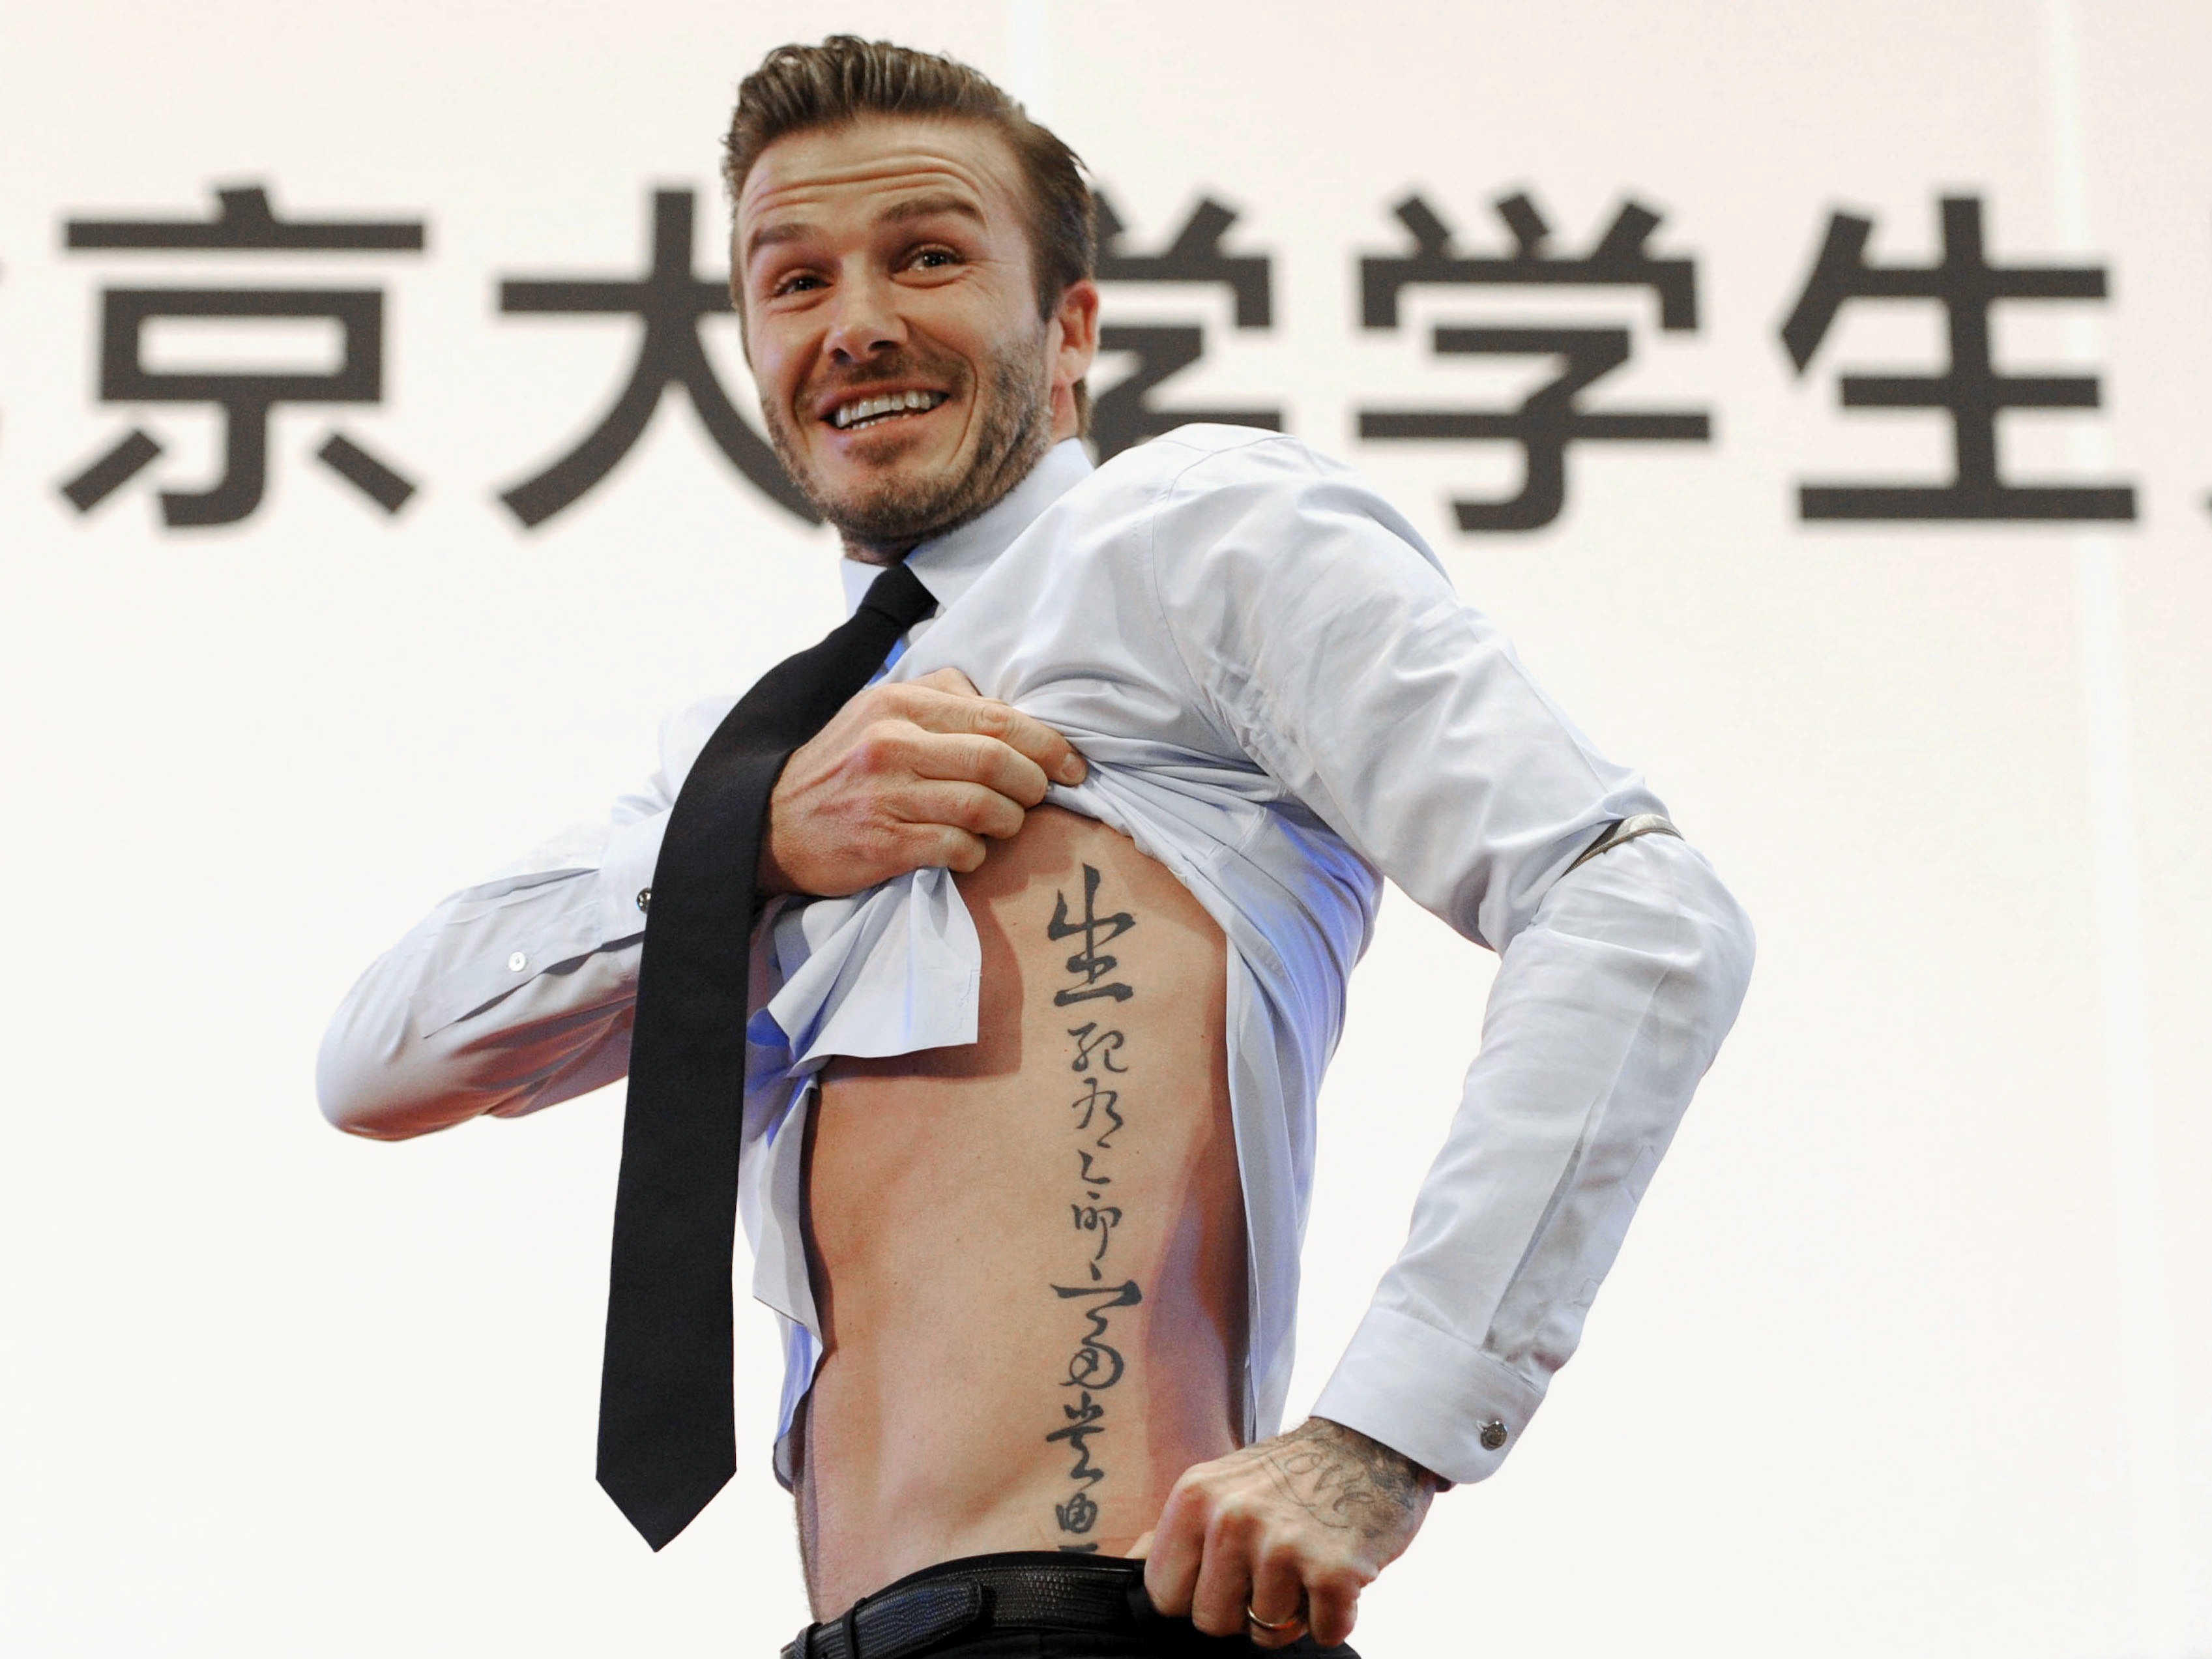 David Beckham shows his tattoo during a visit to Beijing in 2013. The tattoo in Chinese characters reads, "Life and death are determined by fate, rank and riches decreed by Heaven." Photo: Reuters